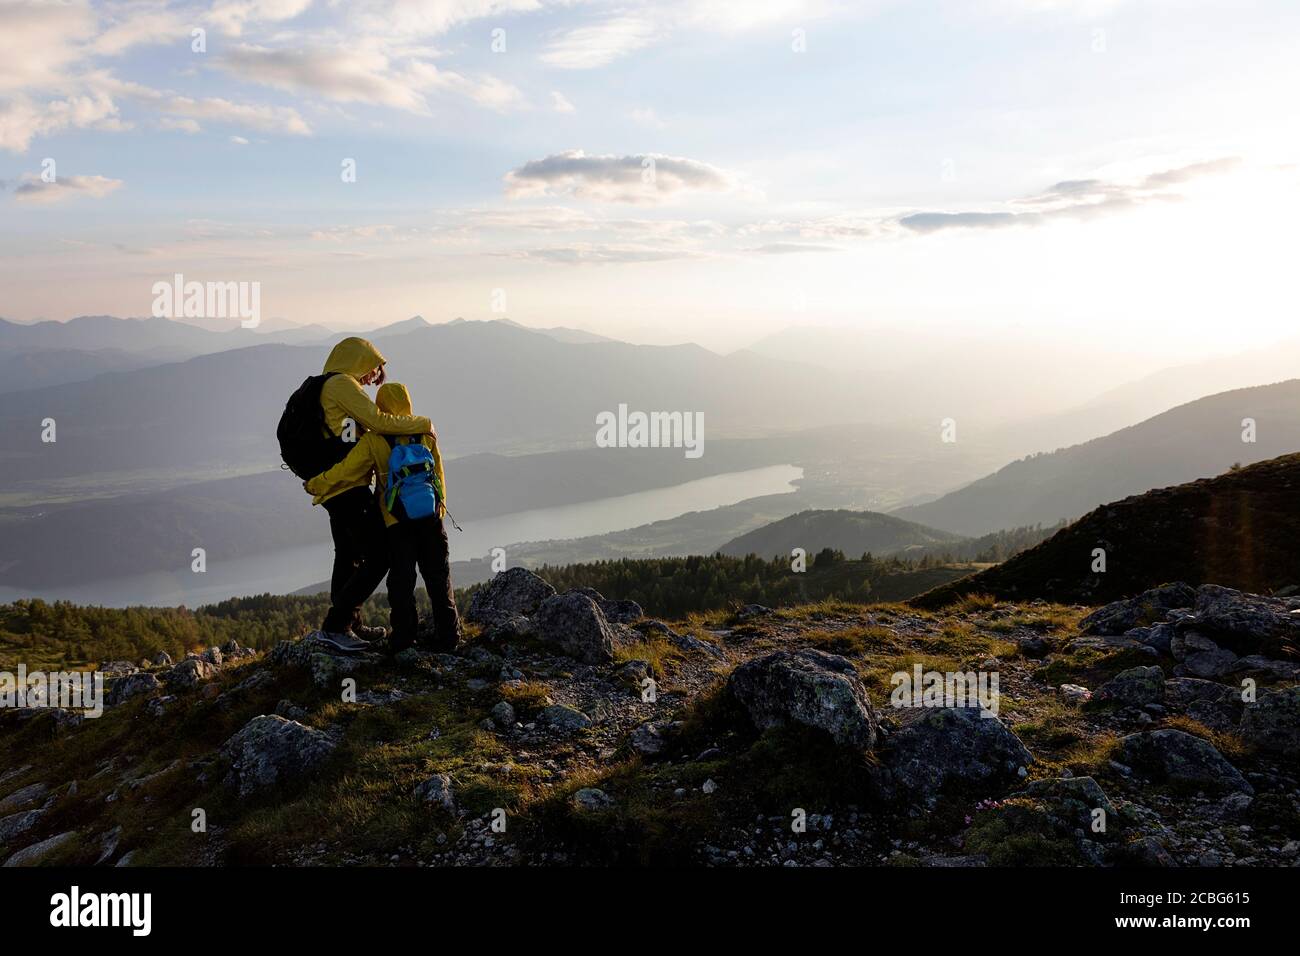 Mother and son Mother and son having a good time outdoors on mountain with a view over the lake, Granattor, Lammersdorf Mountain, Austria Stock Photo